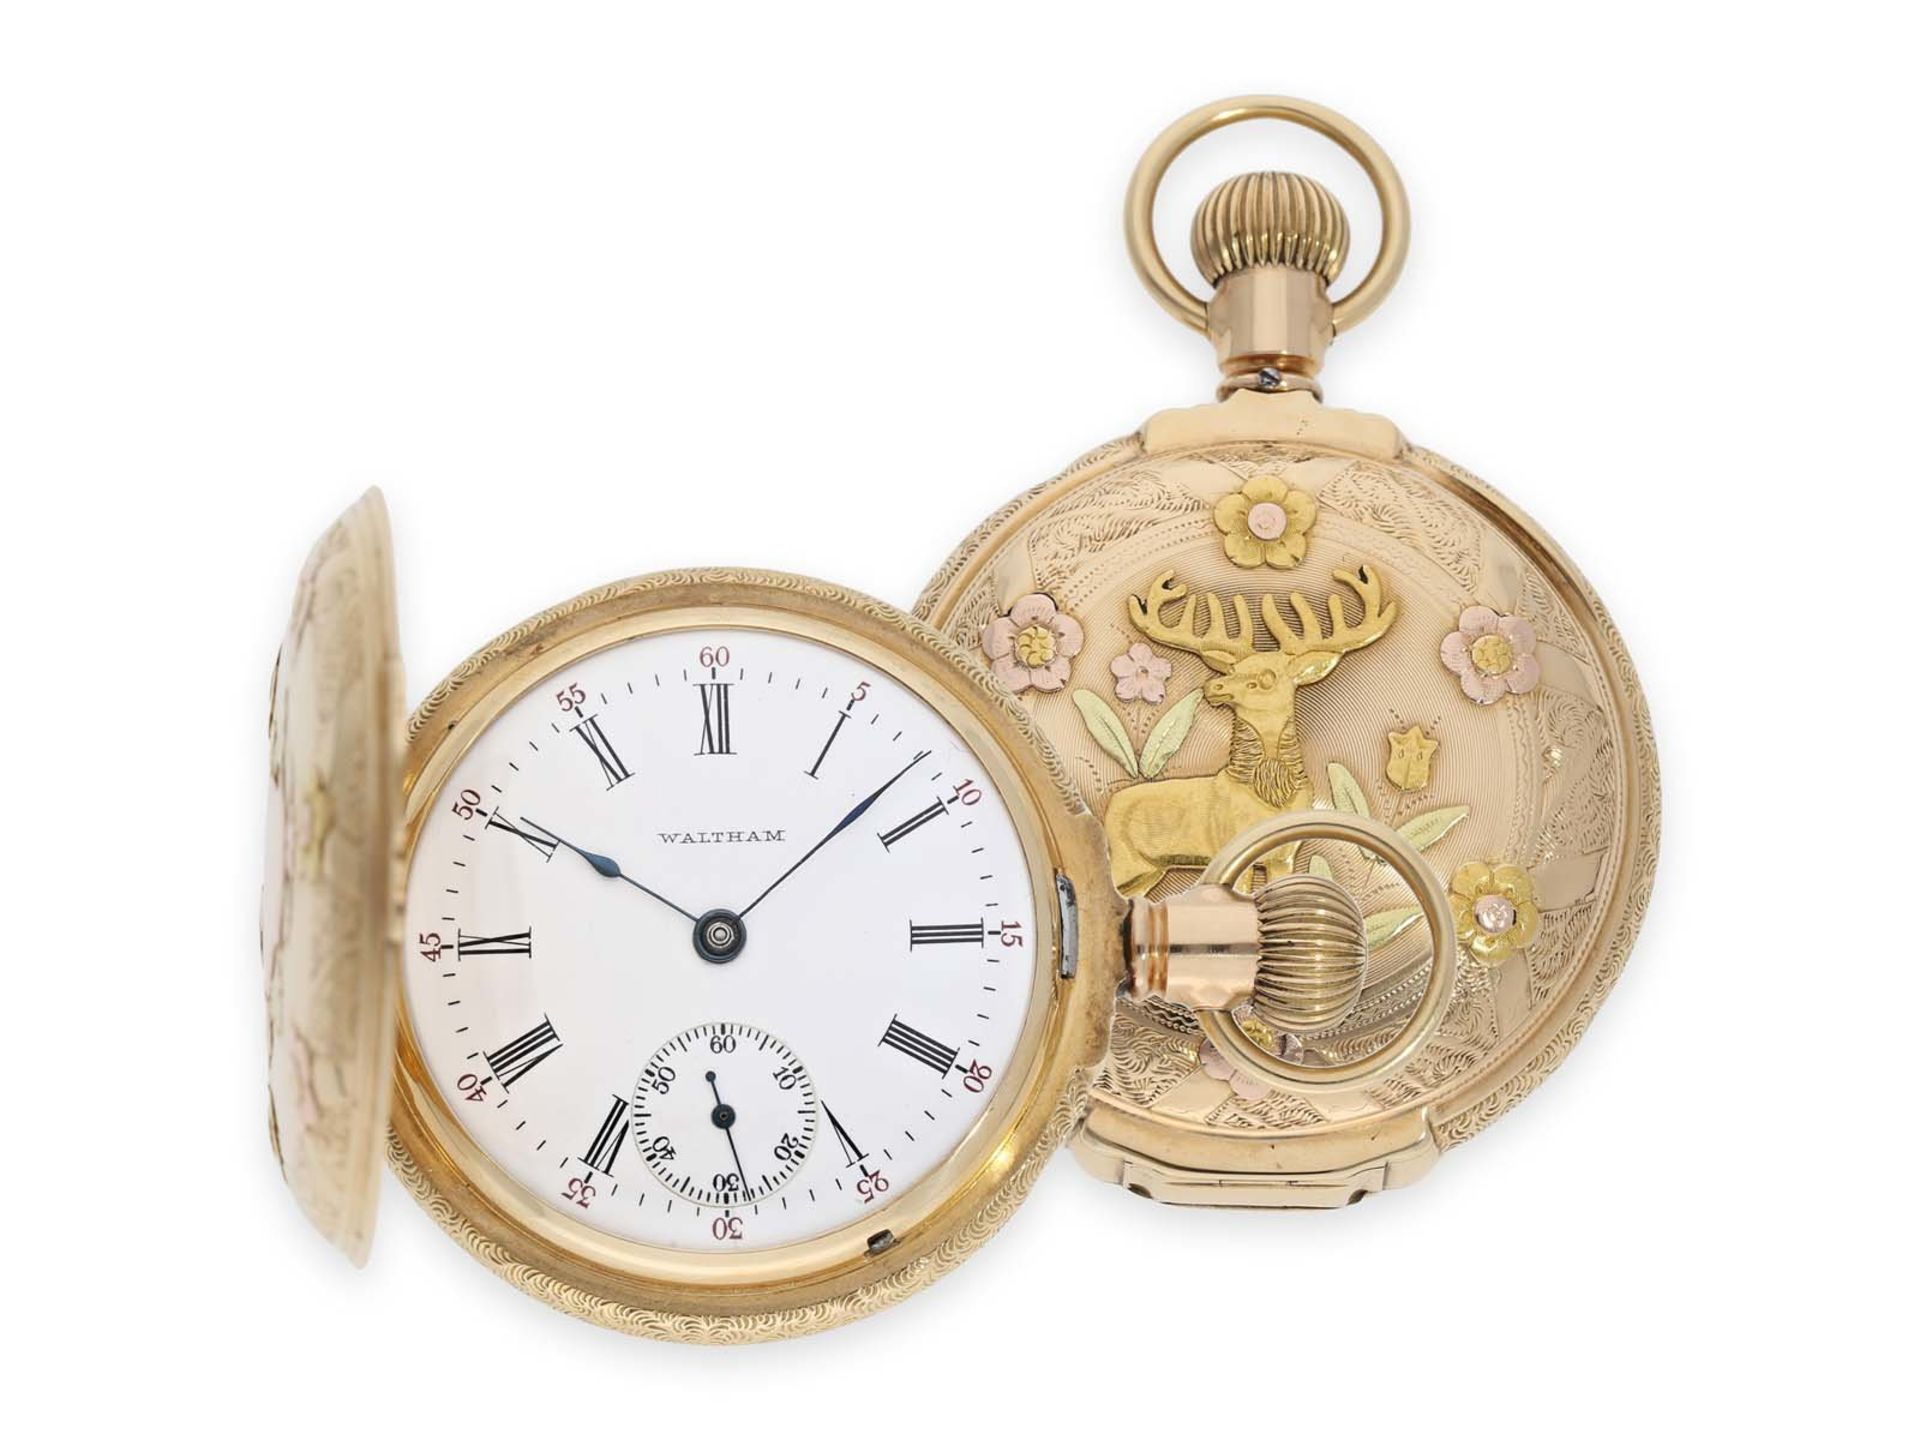 Pocket watch: heavy "Multicolour True Box Hinged" gold hunting case watch in fantastic quality and